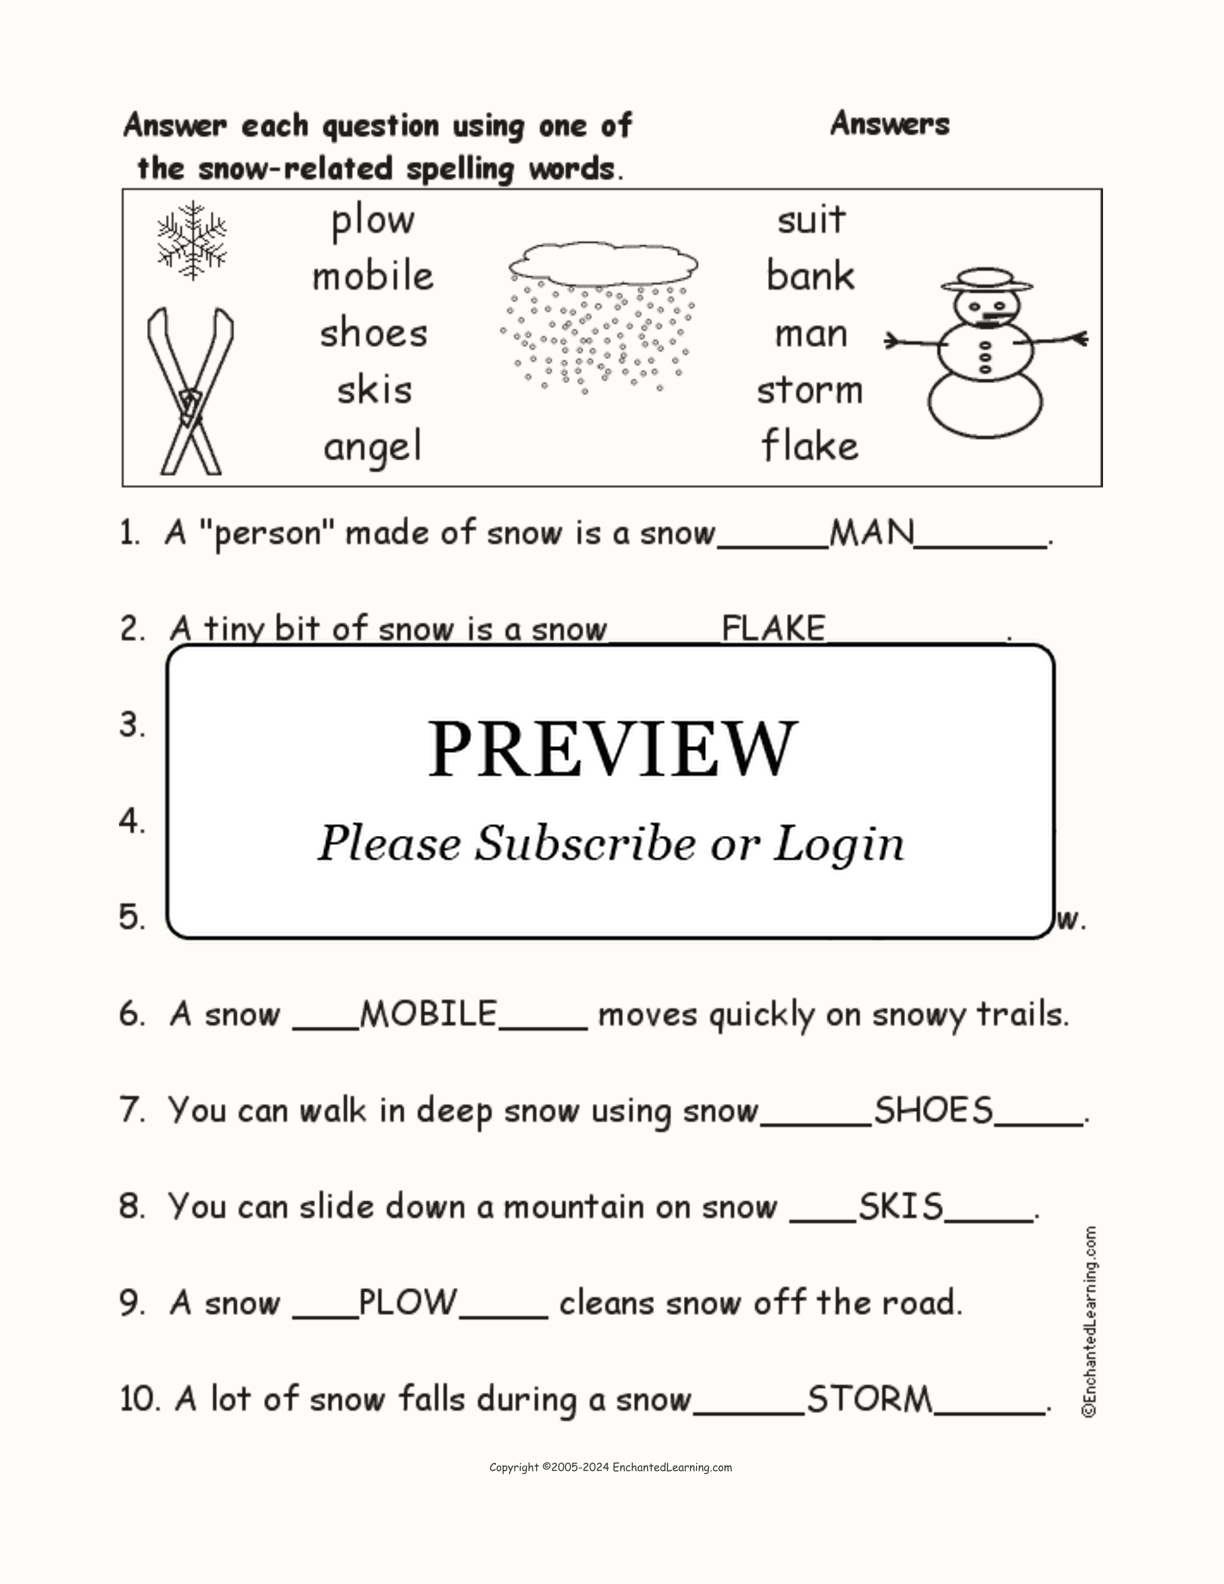 Snow-Related Spelling Word Questions interactive worksheet page 2